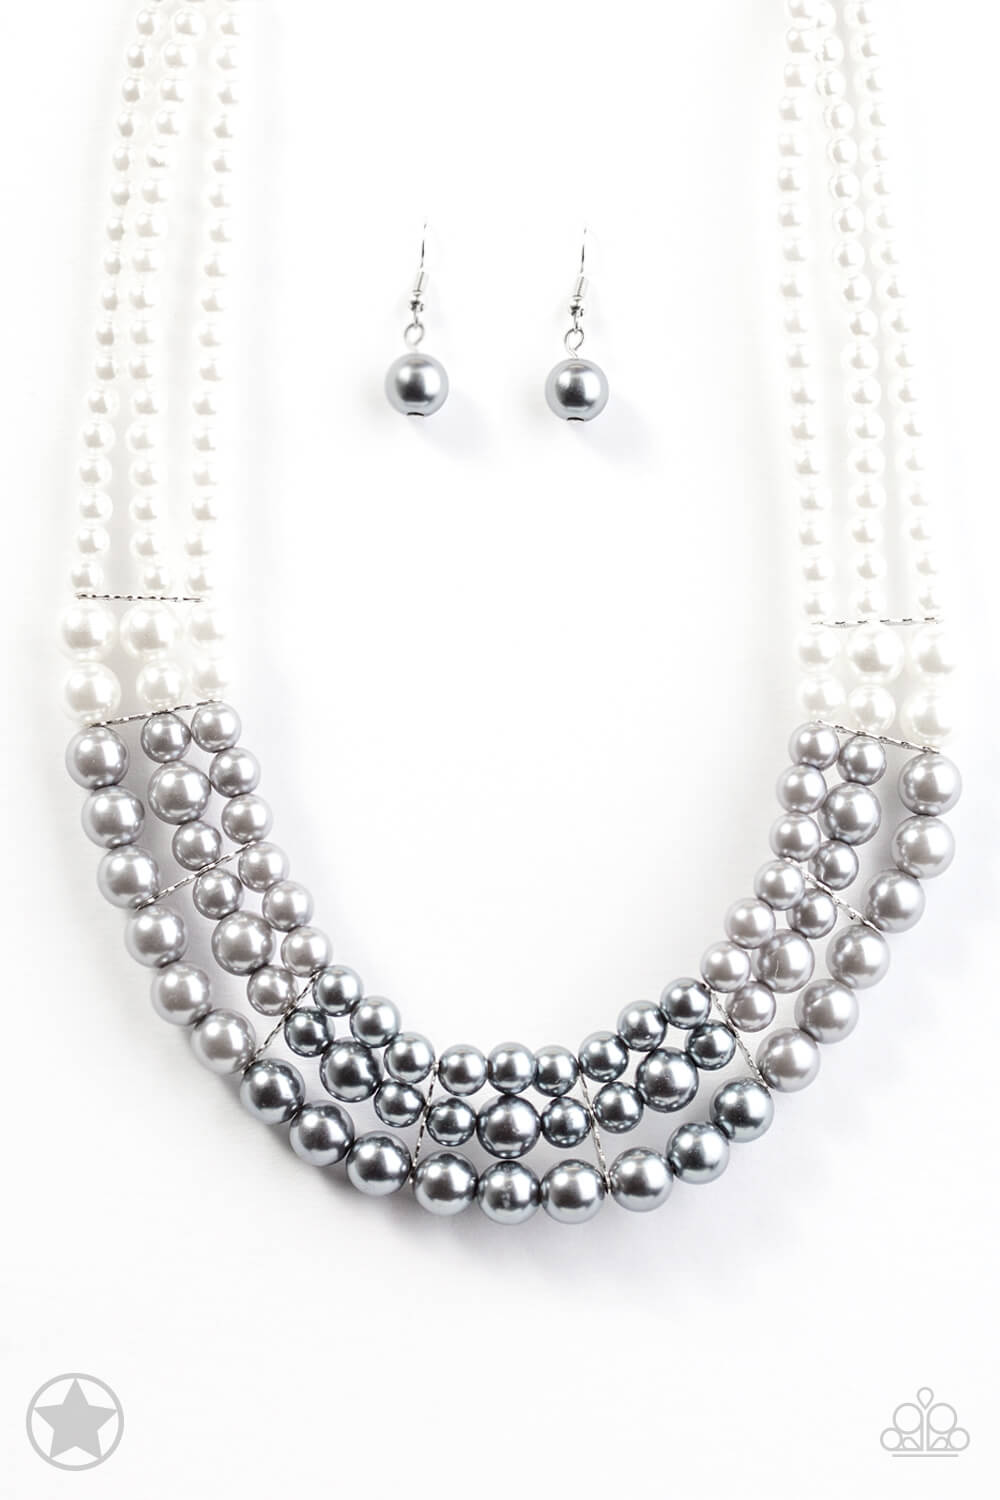 Lady In Waiting Silver Pearl Necklace Set - Princess Glam Shop